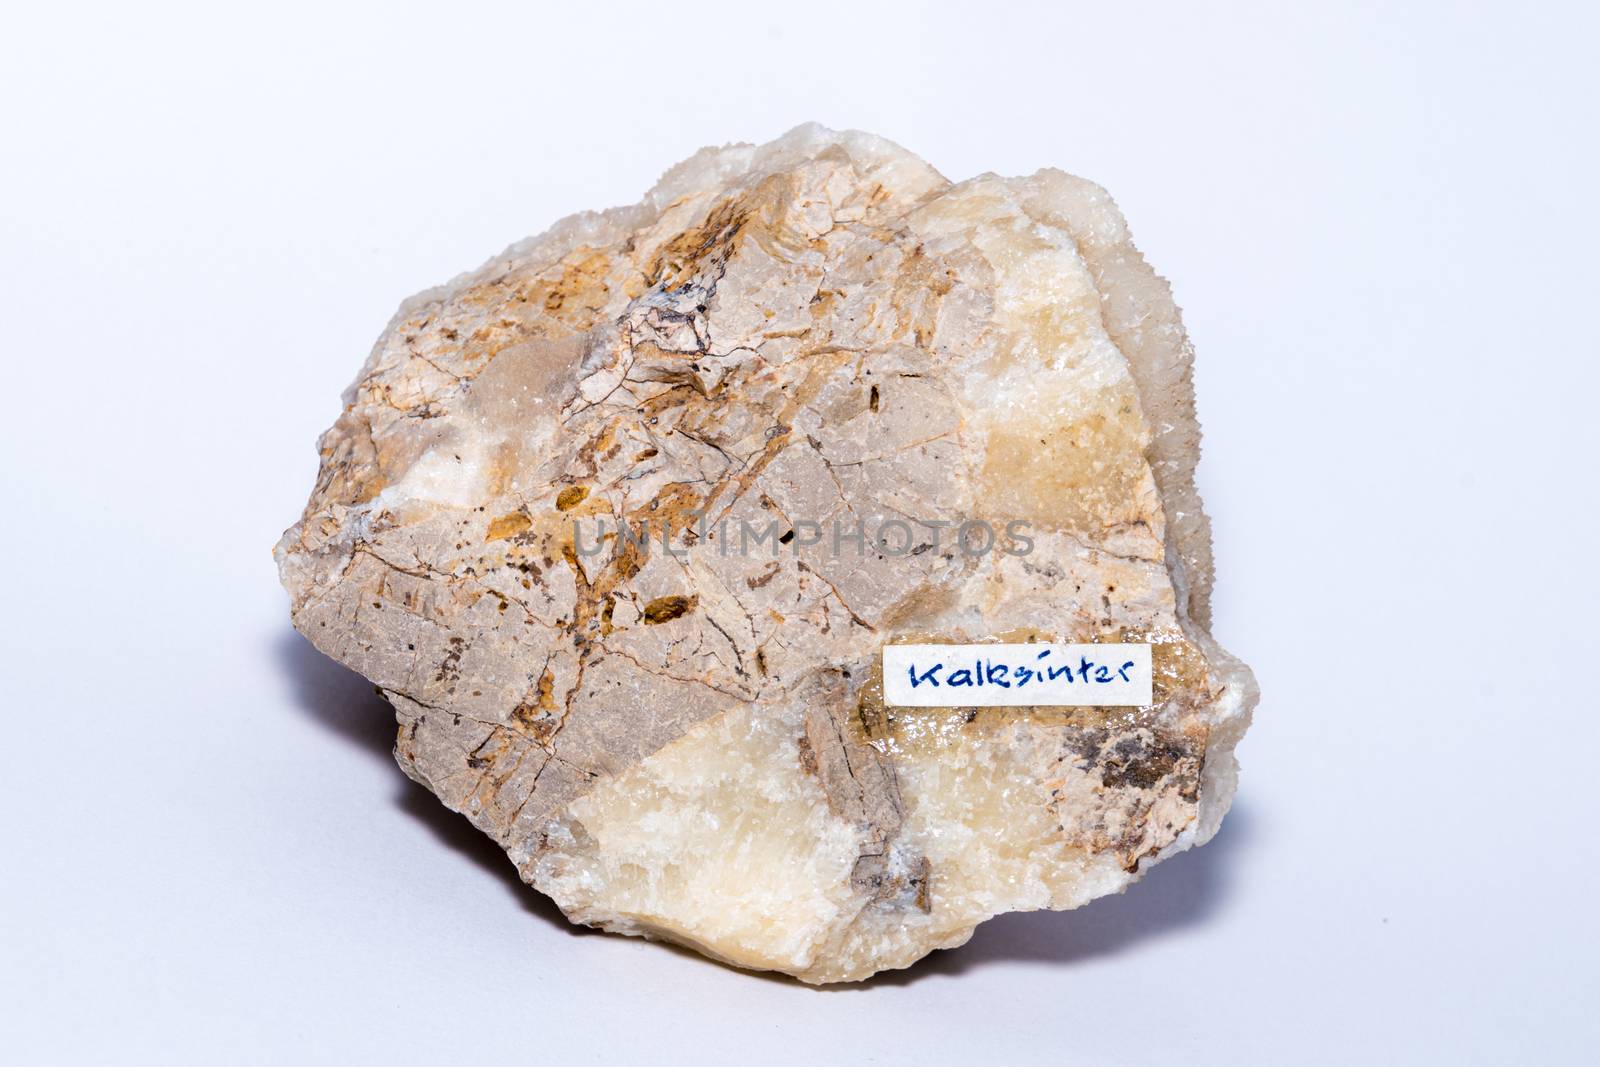 Calc-sinter white gemstone formed on an usual piece of bed rock